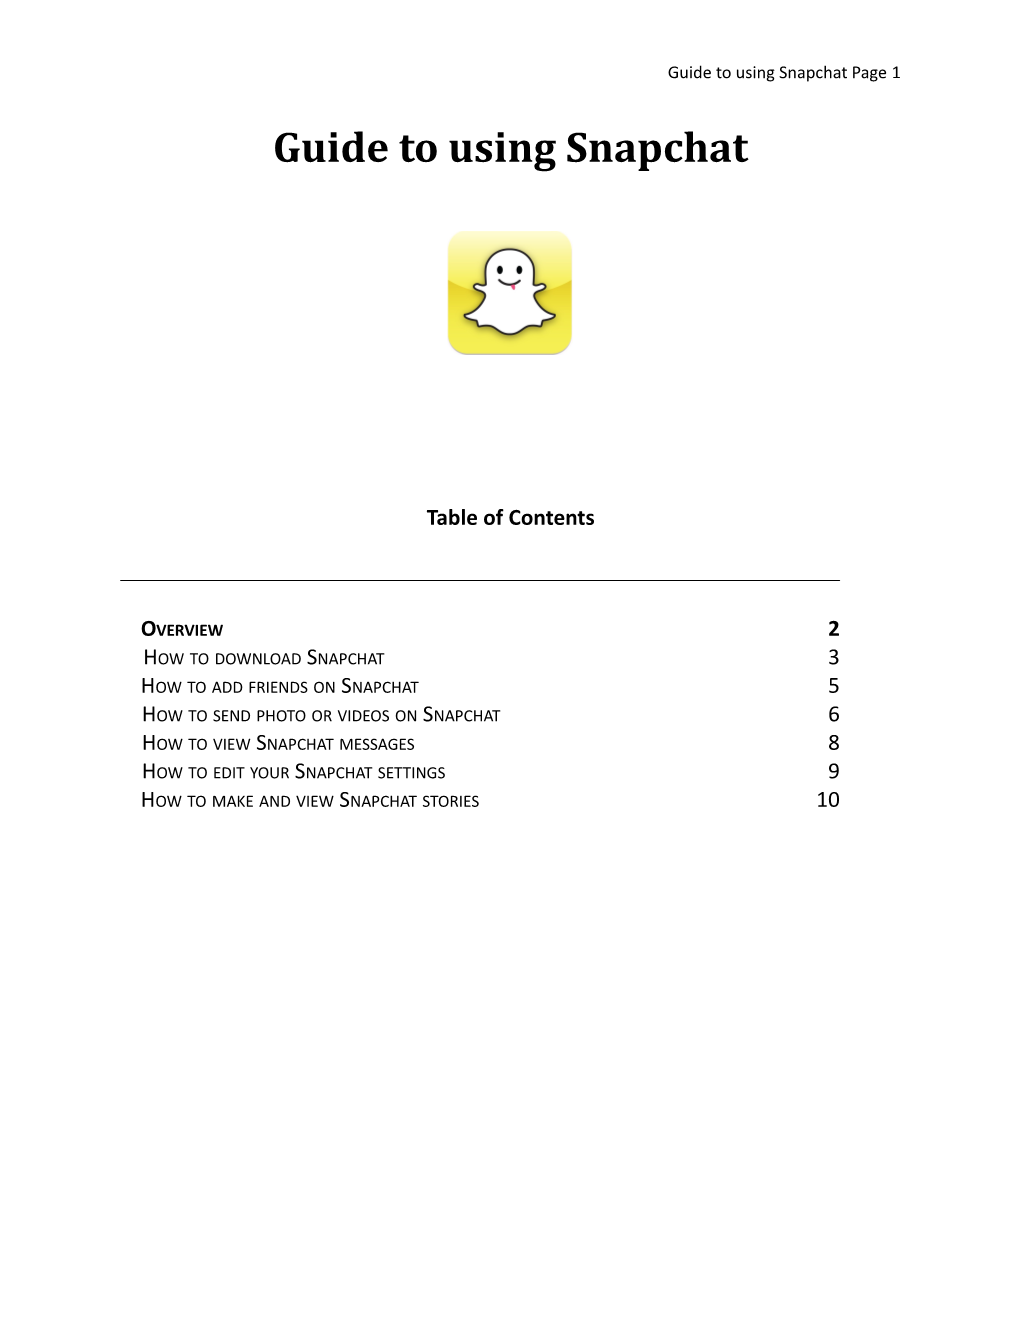 Snapchat Instructions Maricle (Just Text)